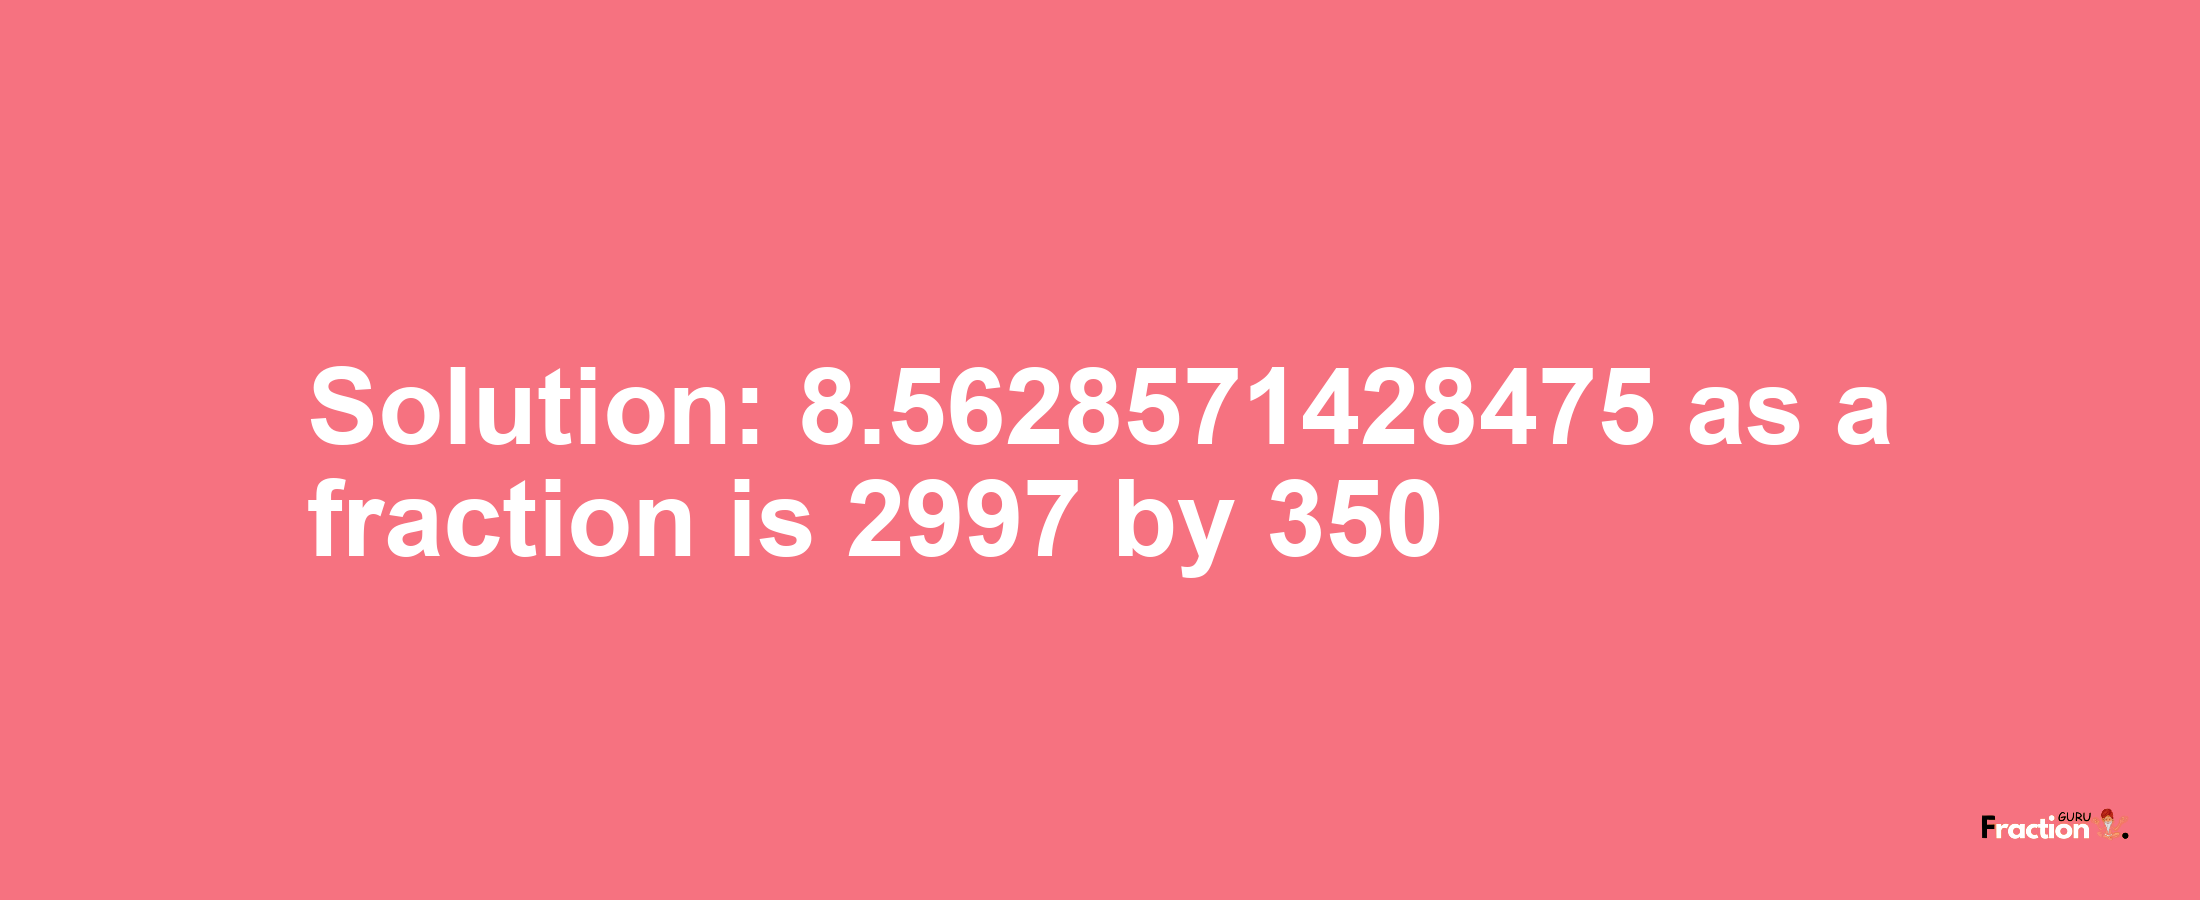 Solution:8.5628571428475 as a fraction is 2997/350